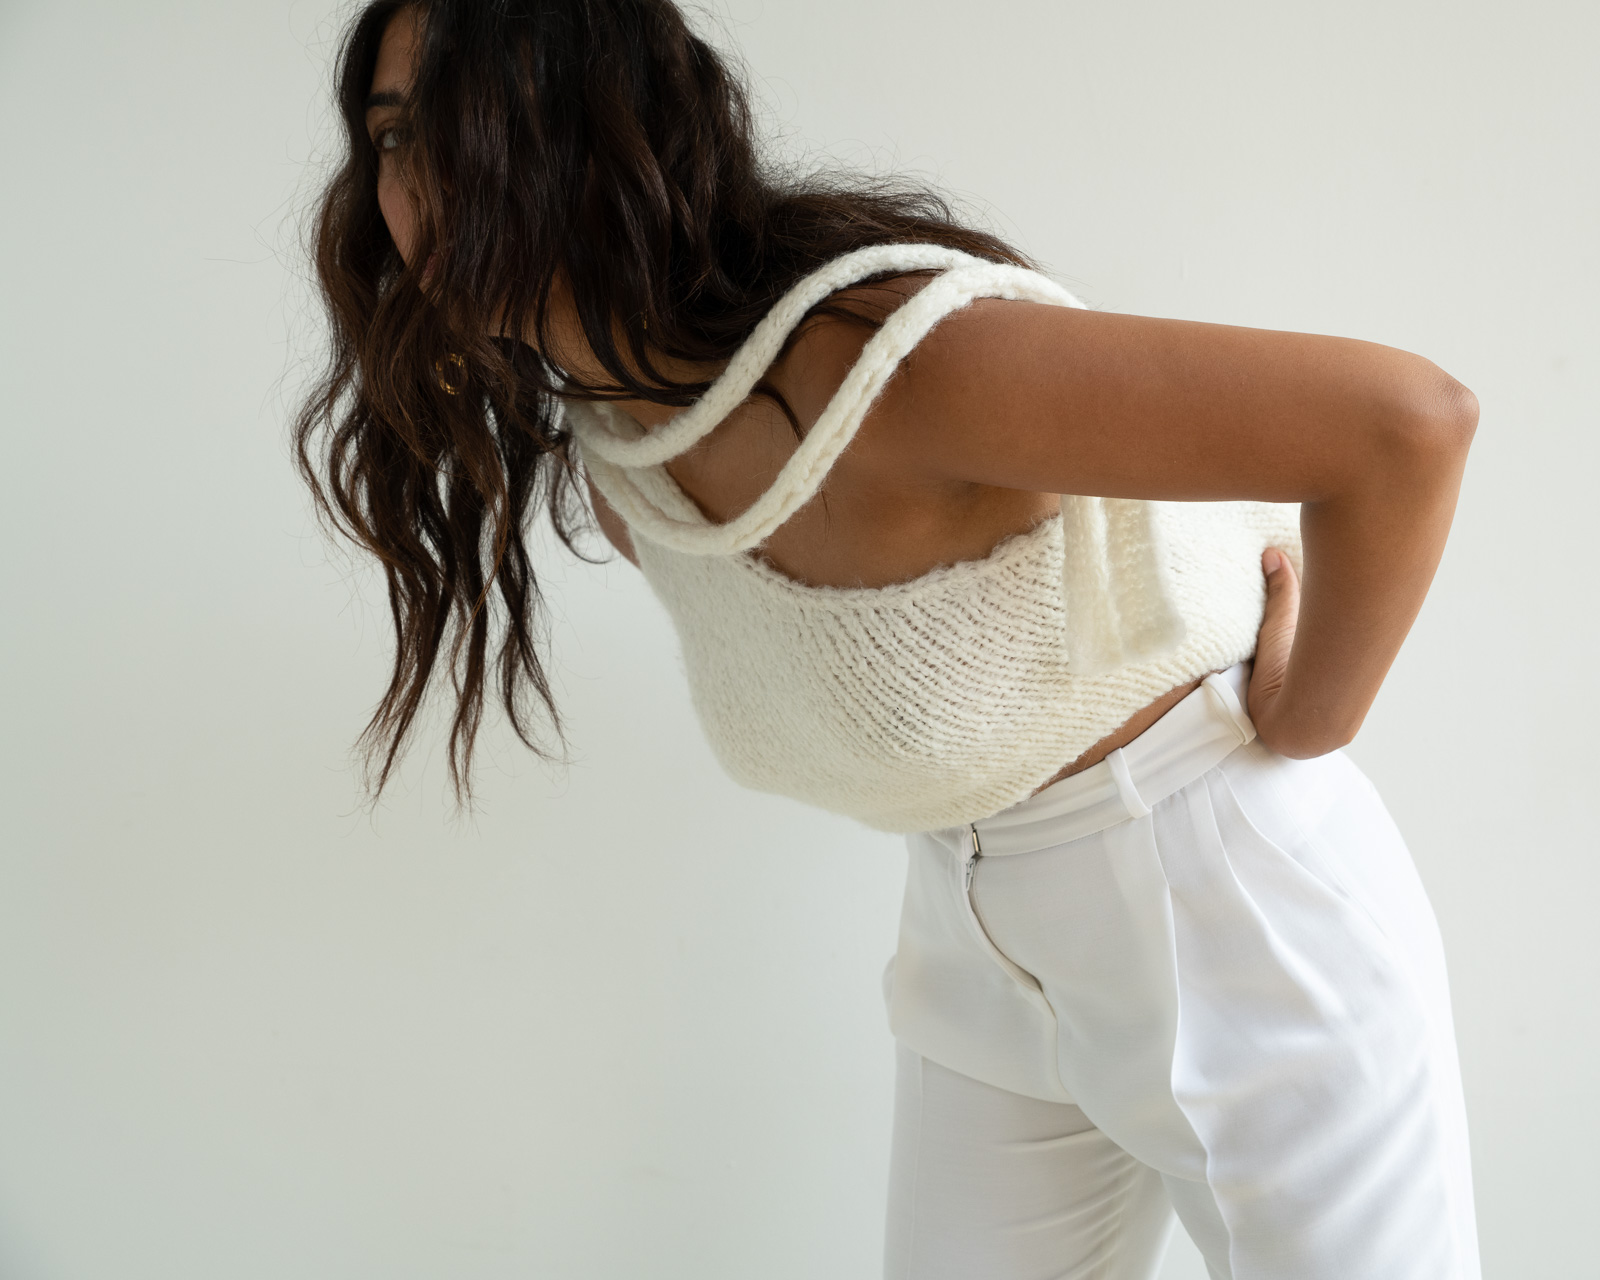 Storm wes wears malaika Raiss white knit top with gold earrings and white pants